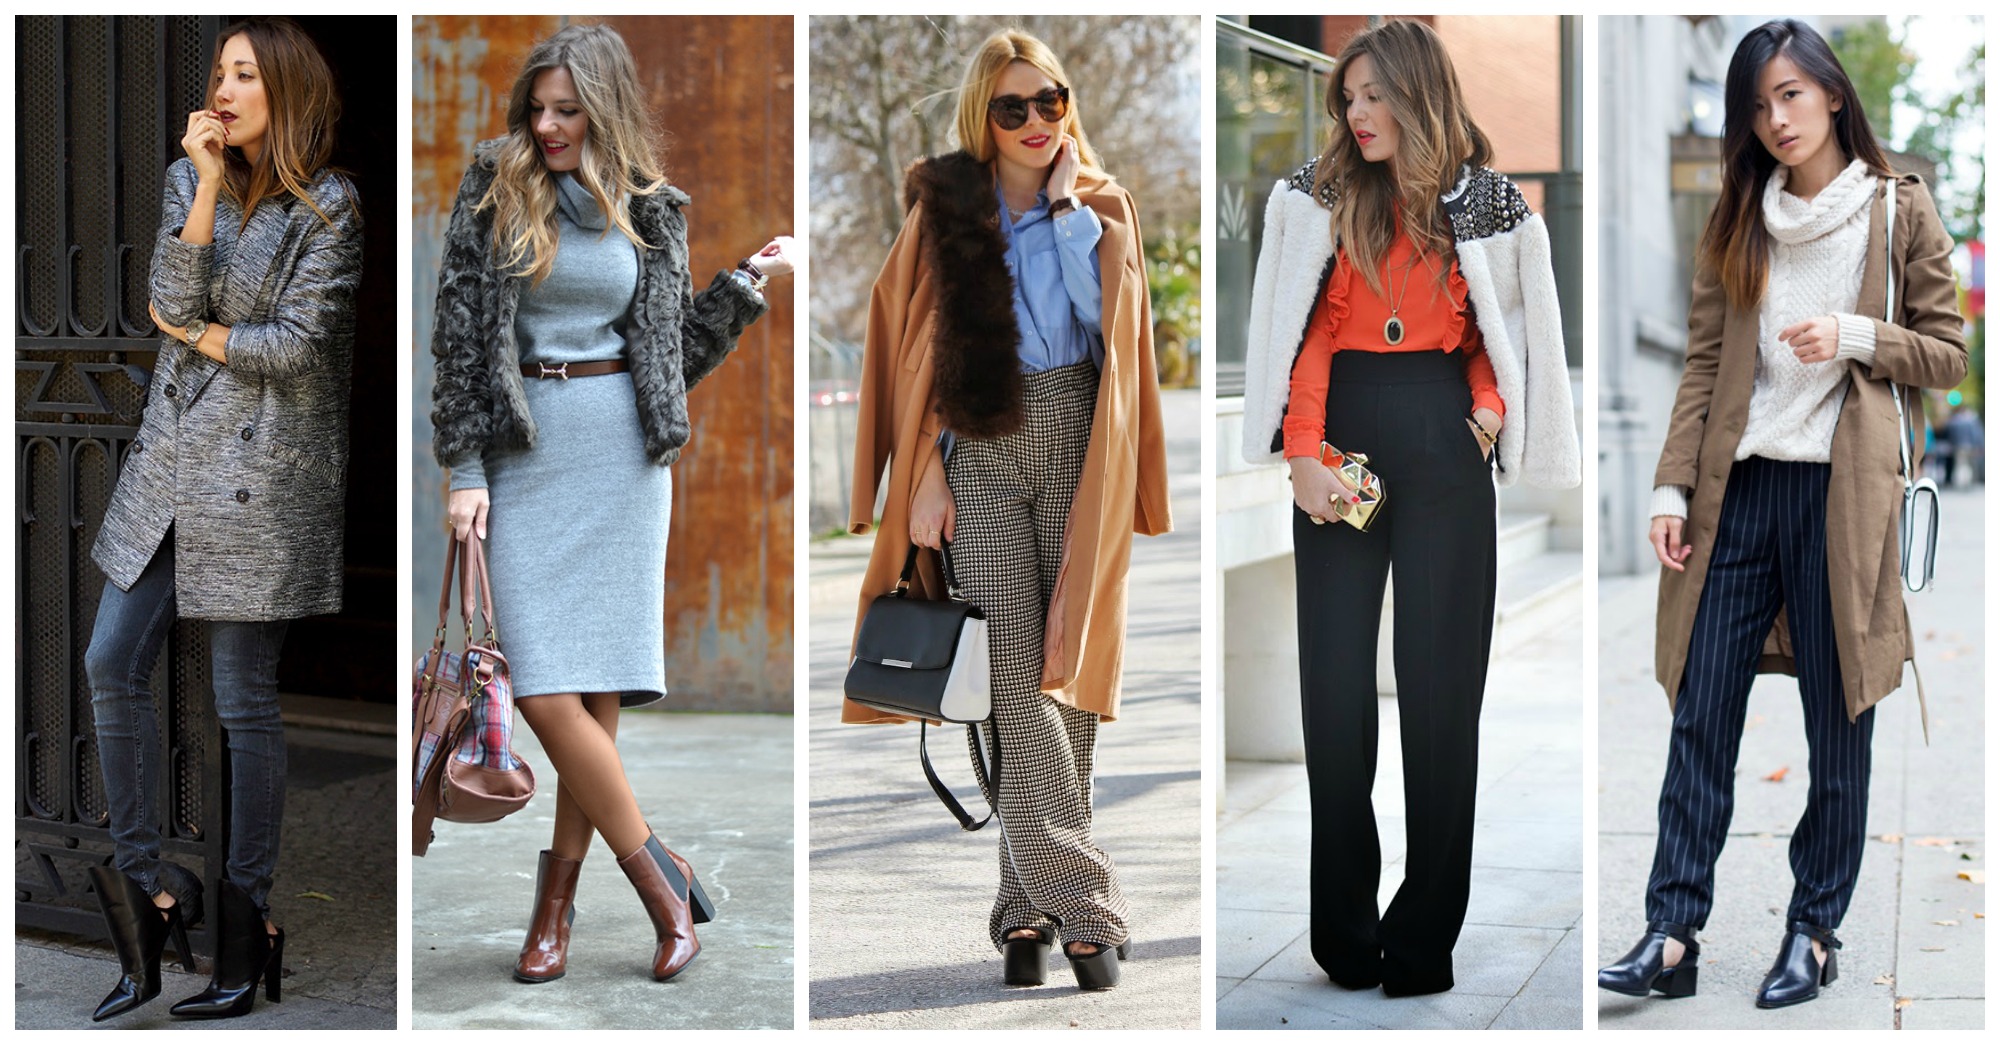 Classy and Elegant Outfits to Wear to Work